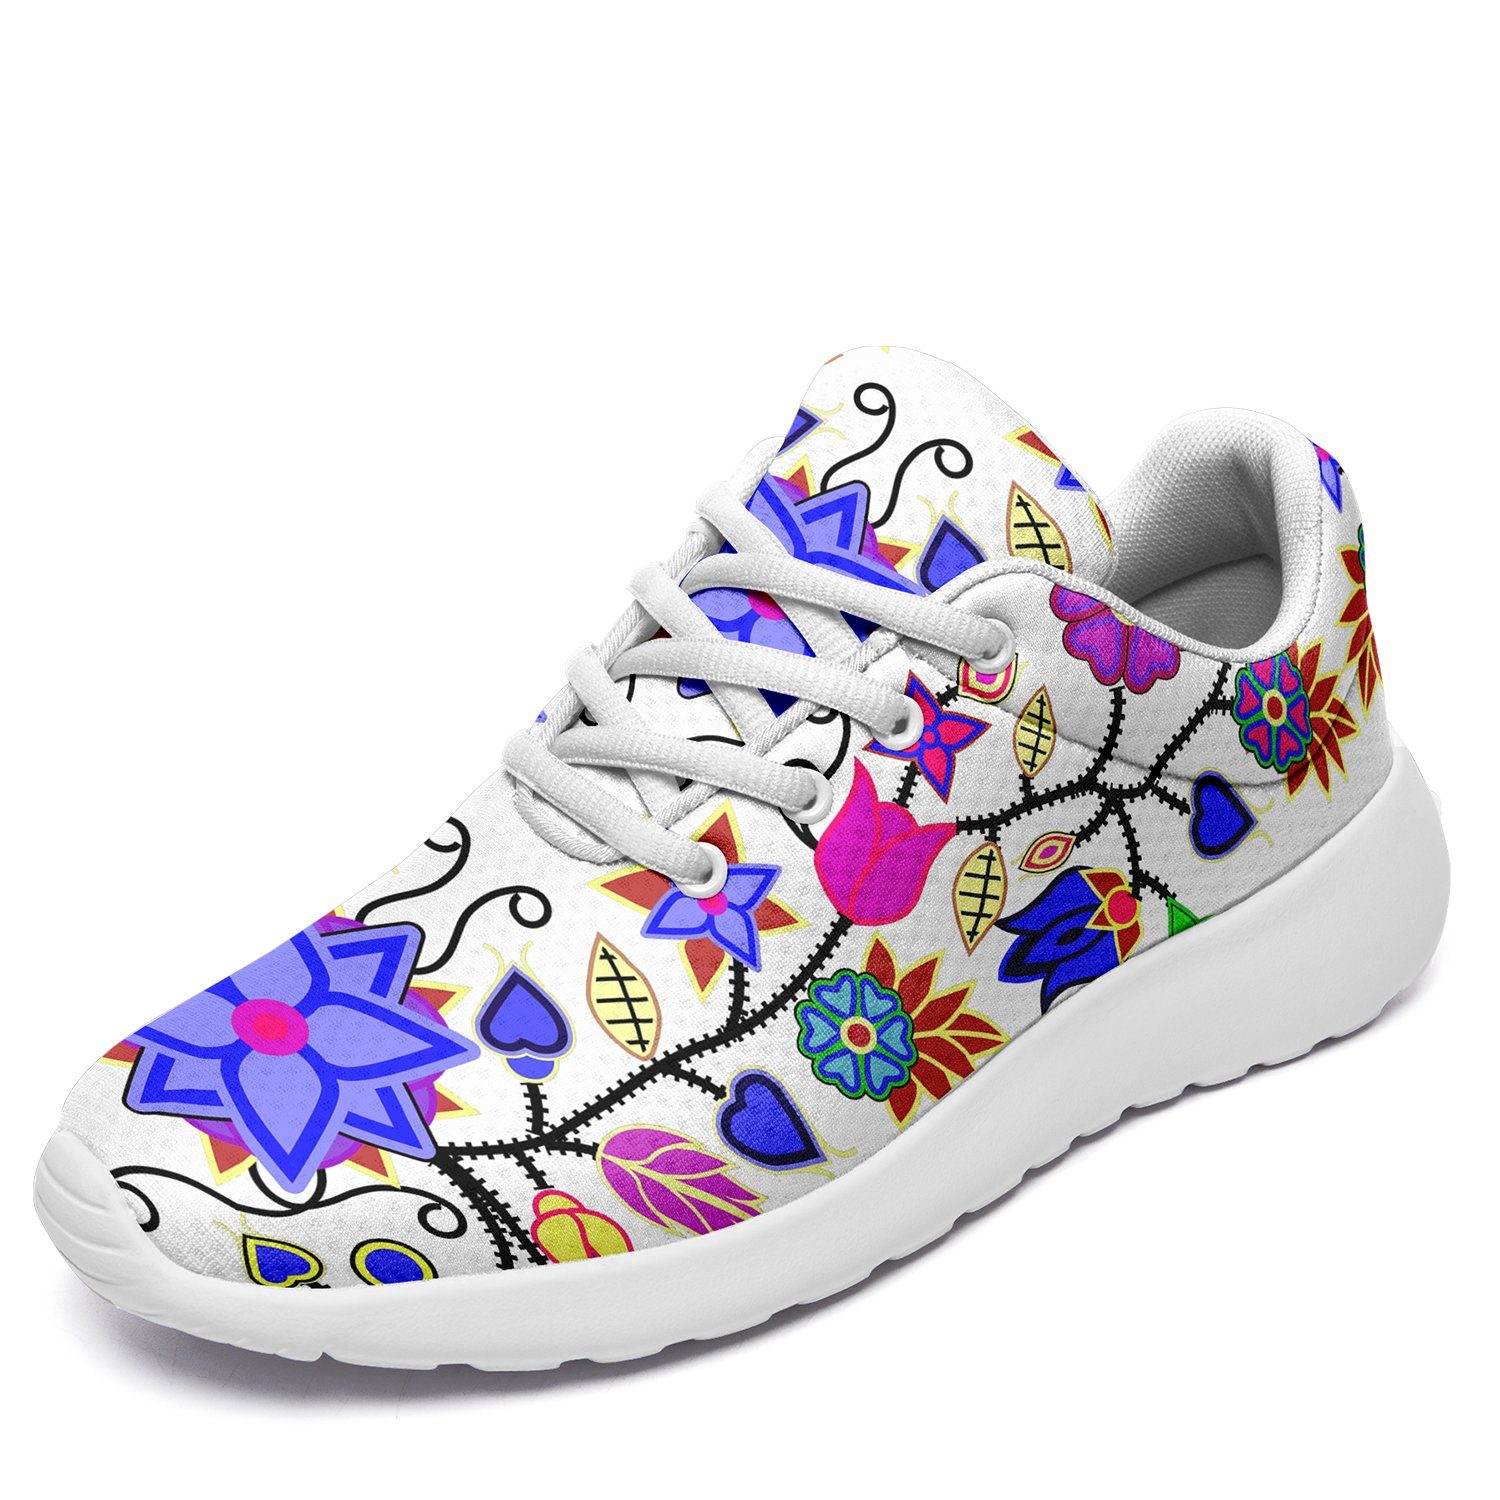 Floral Beadwork Seven Clans White Ikkaayi Sport Sneakers 49 Dzine US Women 4.5 / US Youth 3.5 / EUR 35 White Sole 